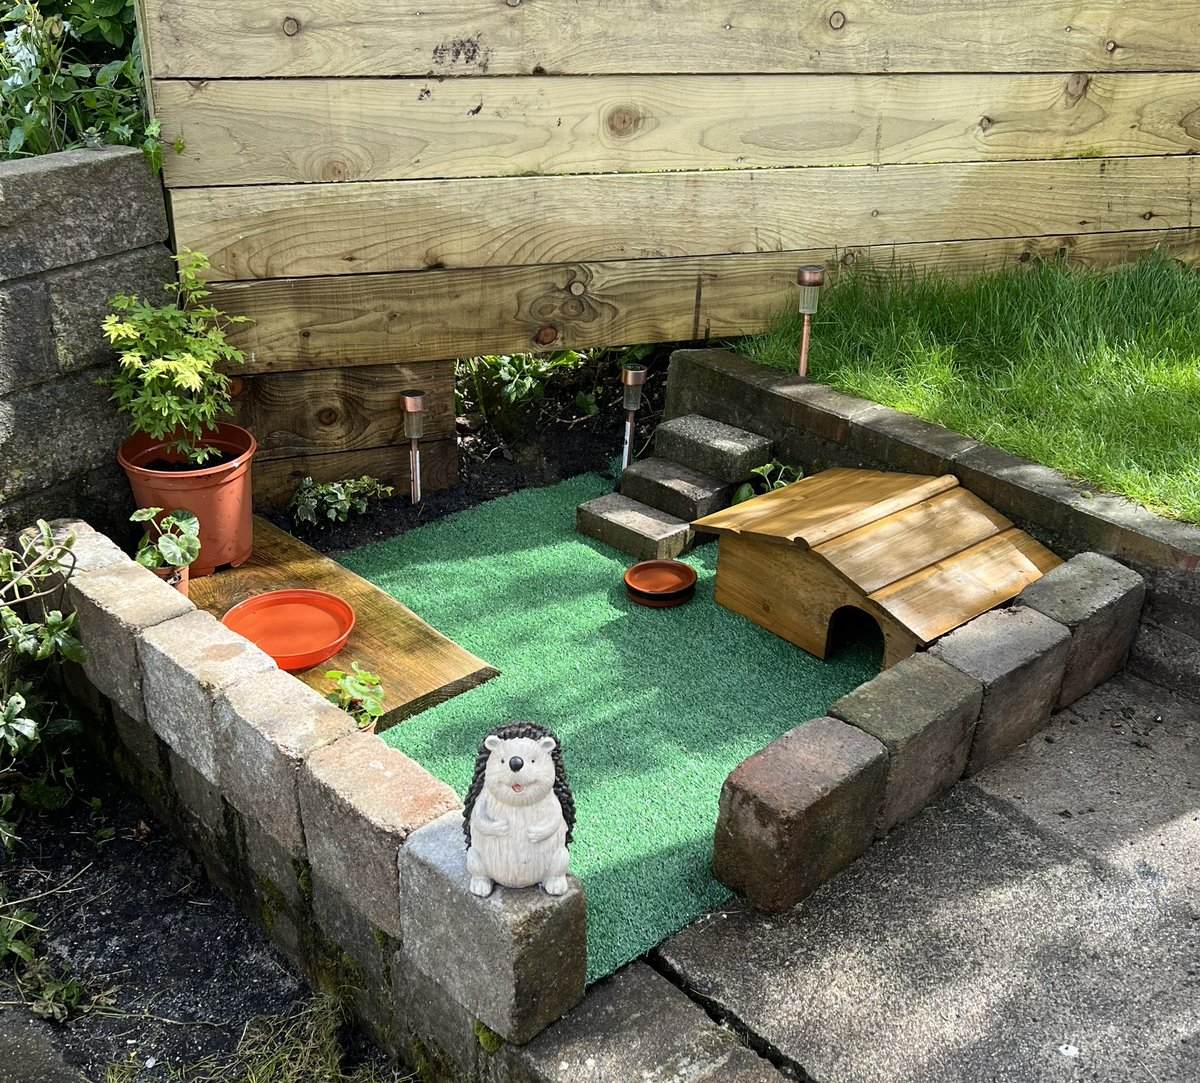 Family Fatso have been visited by the hedgehog equivalent of Stacey Solomon & had their pad renovated 😊 Do you think hedgehogs would enjoy a swimming pool? 🤔 Asking for a friend? (I’m obvs joking, I know they couldn’t use the ladder to get out) #HedgehogLove🤎